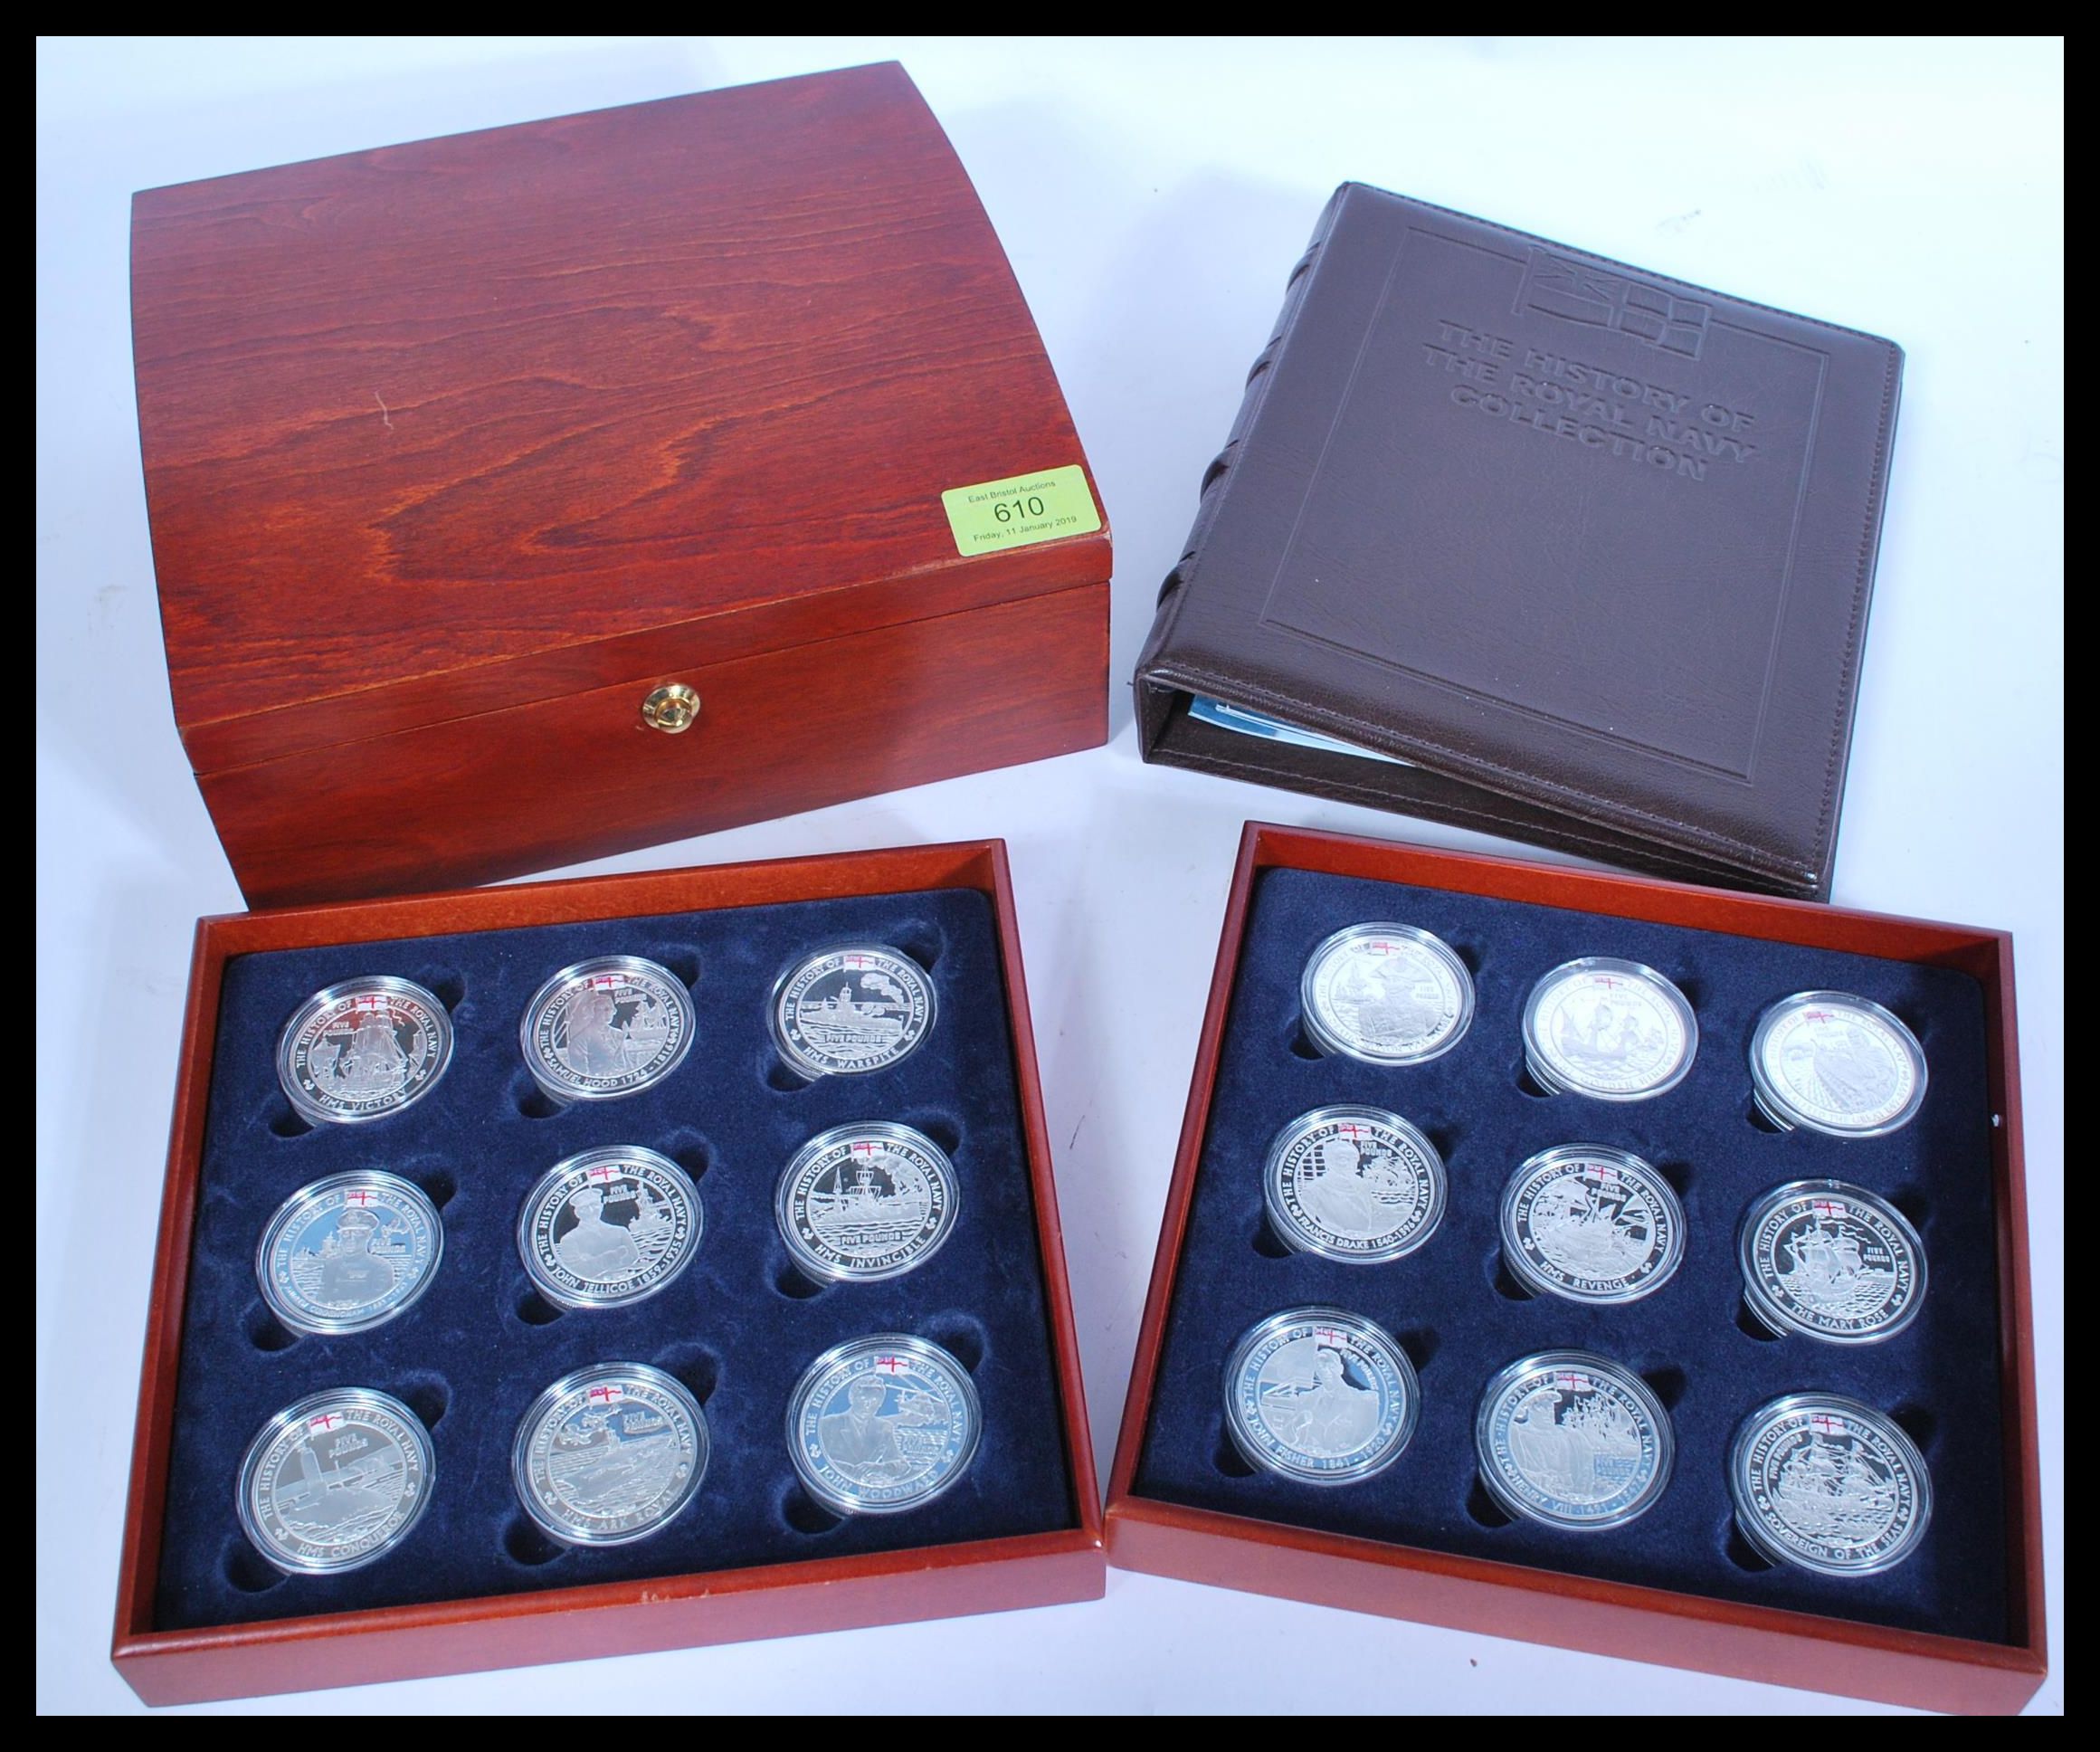 The History Of The Royal Navy silver proof £5 coins from Alderney / Jersey / Guernsey silver proof